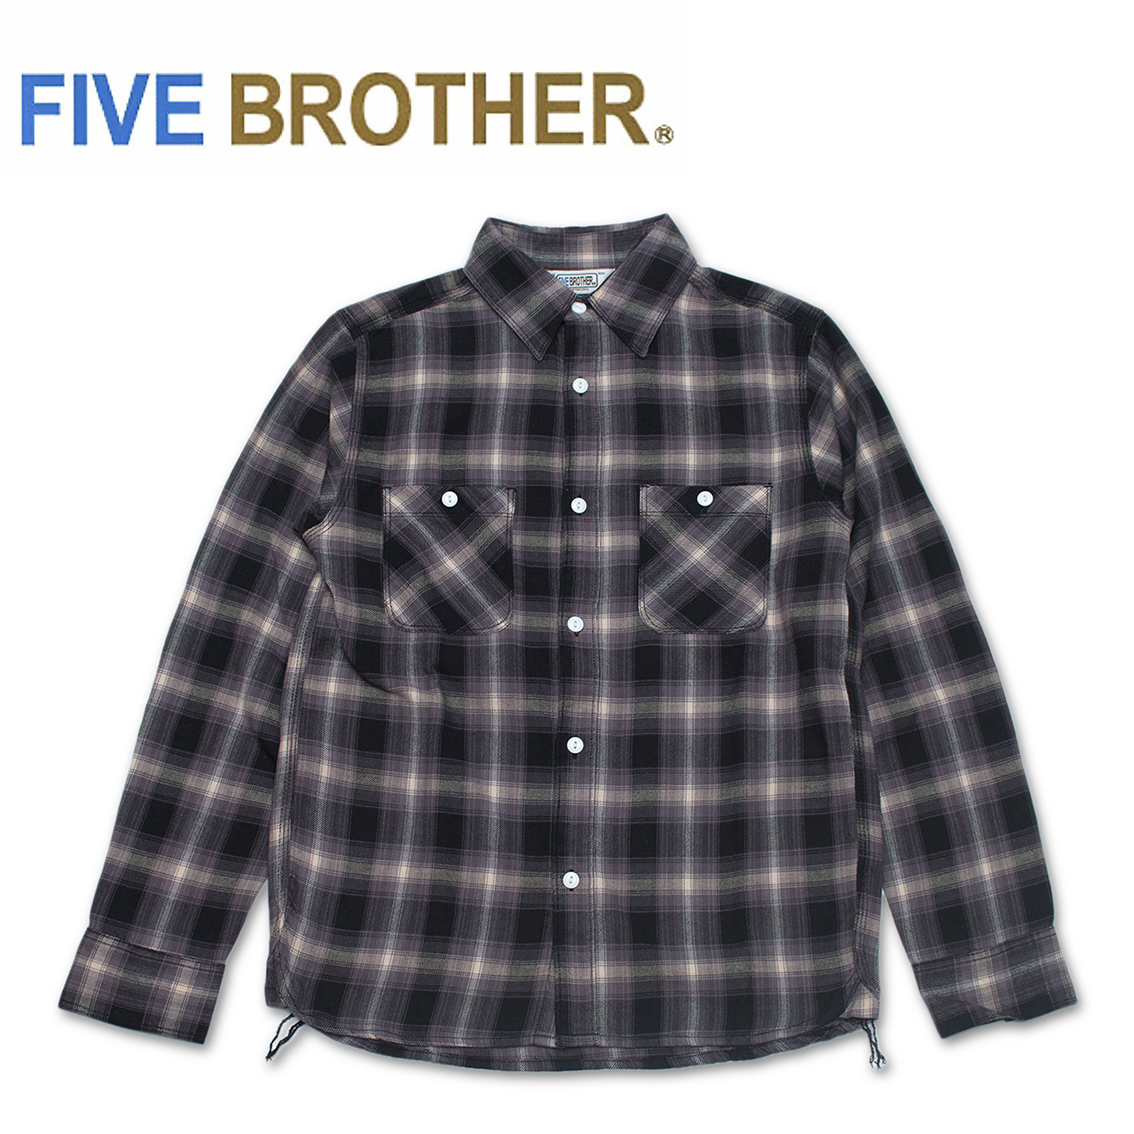 HARTLEY CLOTHING STORE BLOG: FIVE BROTHER ファイブブラザー ライトネル ワーク シャツ